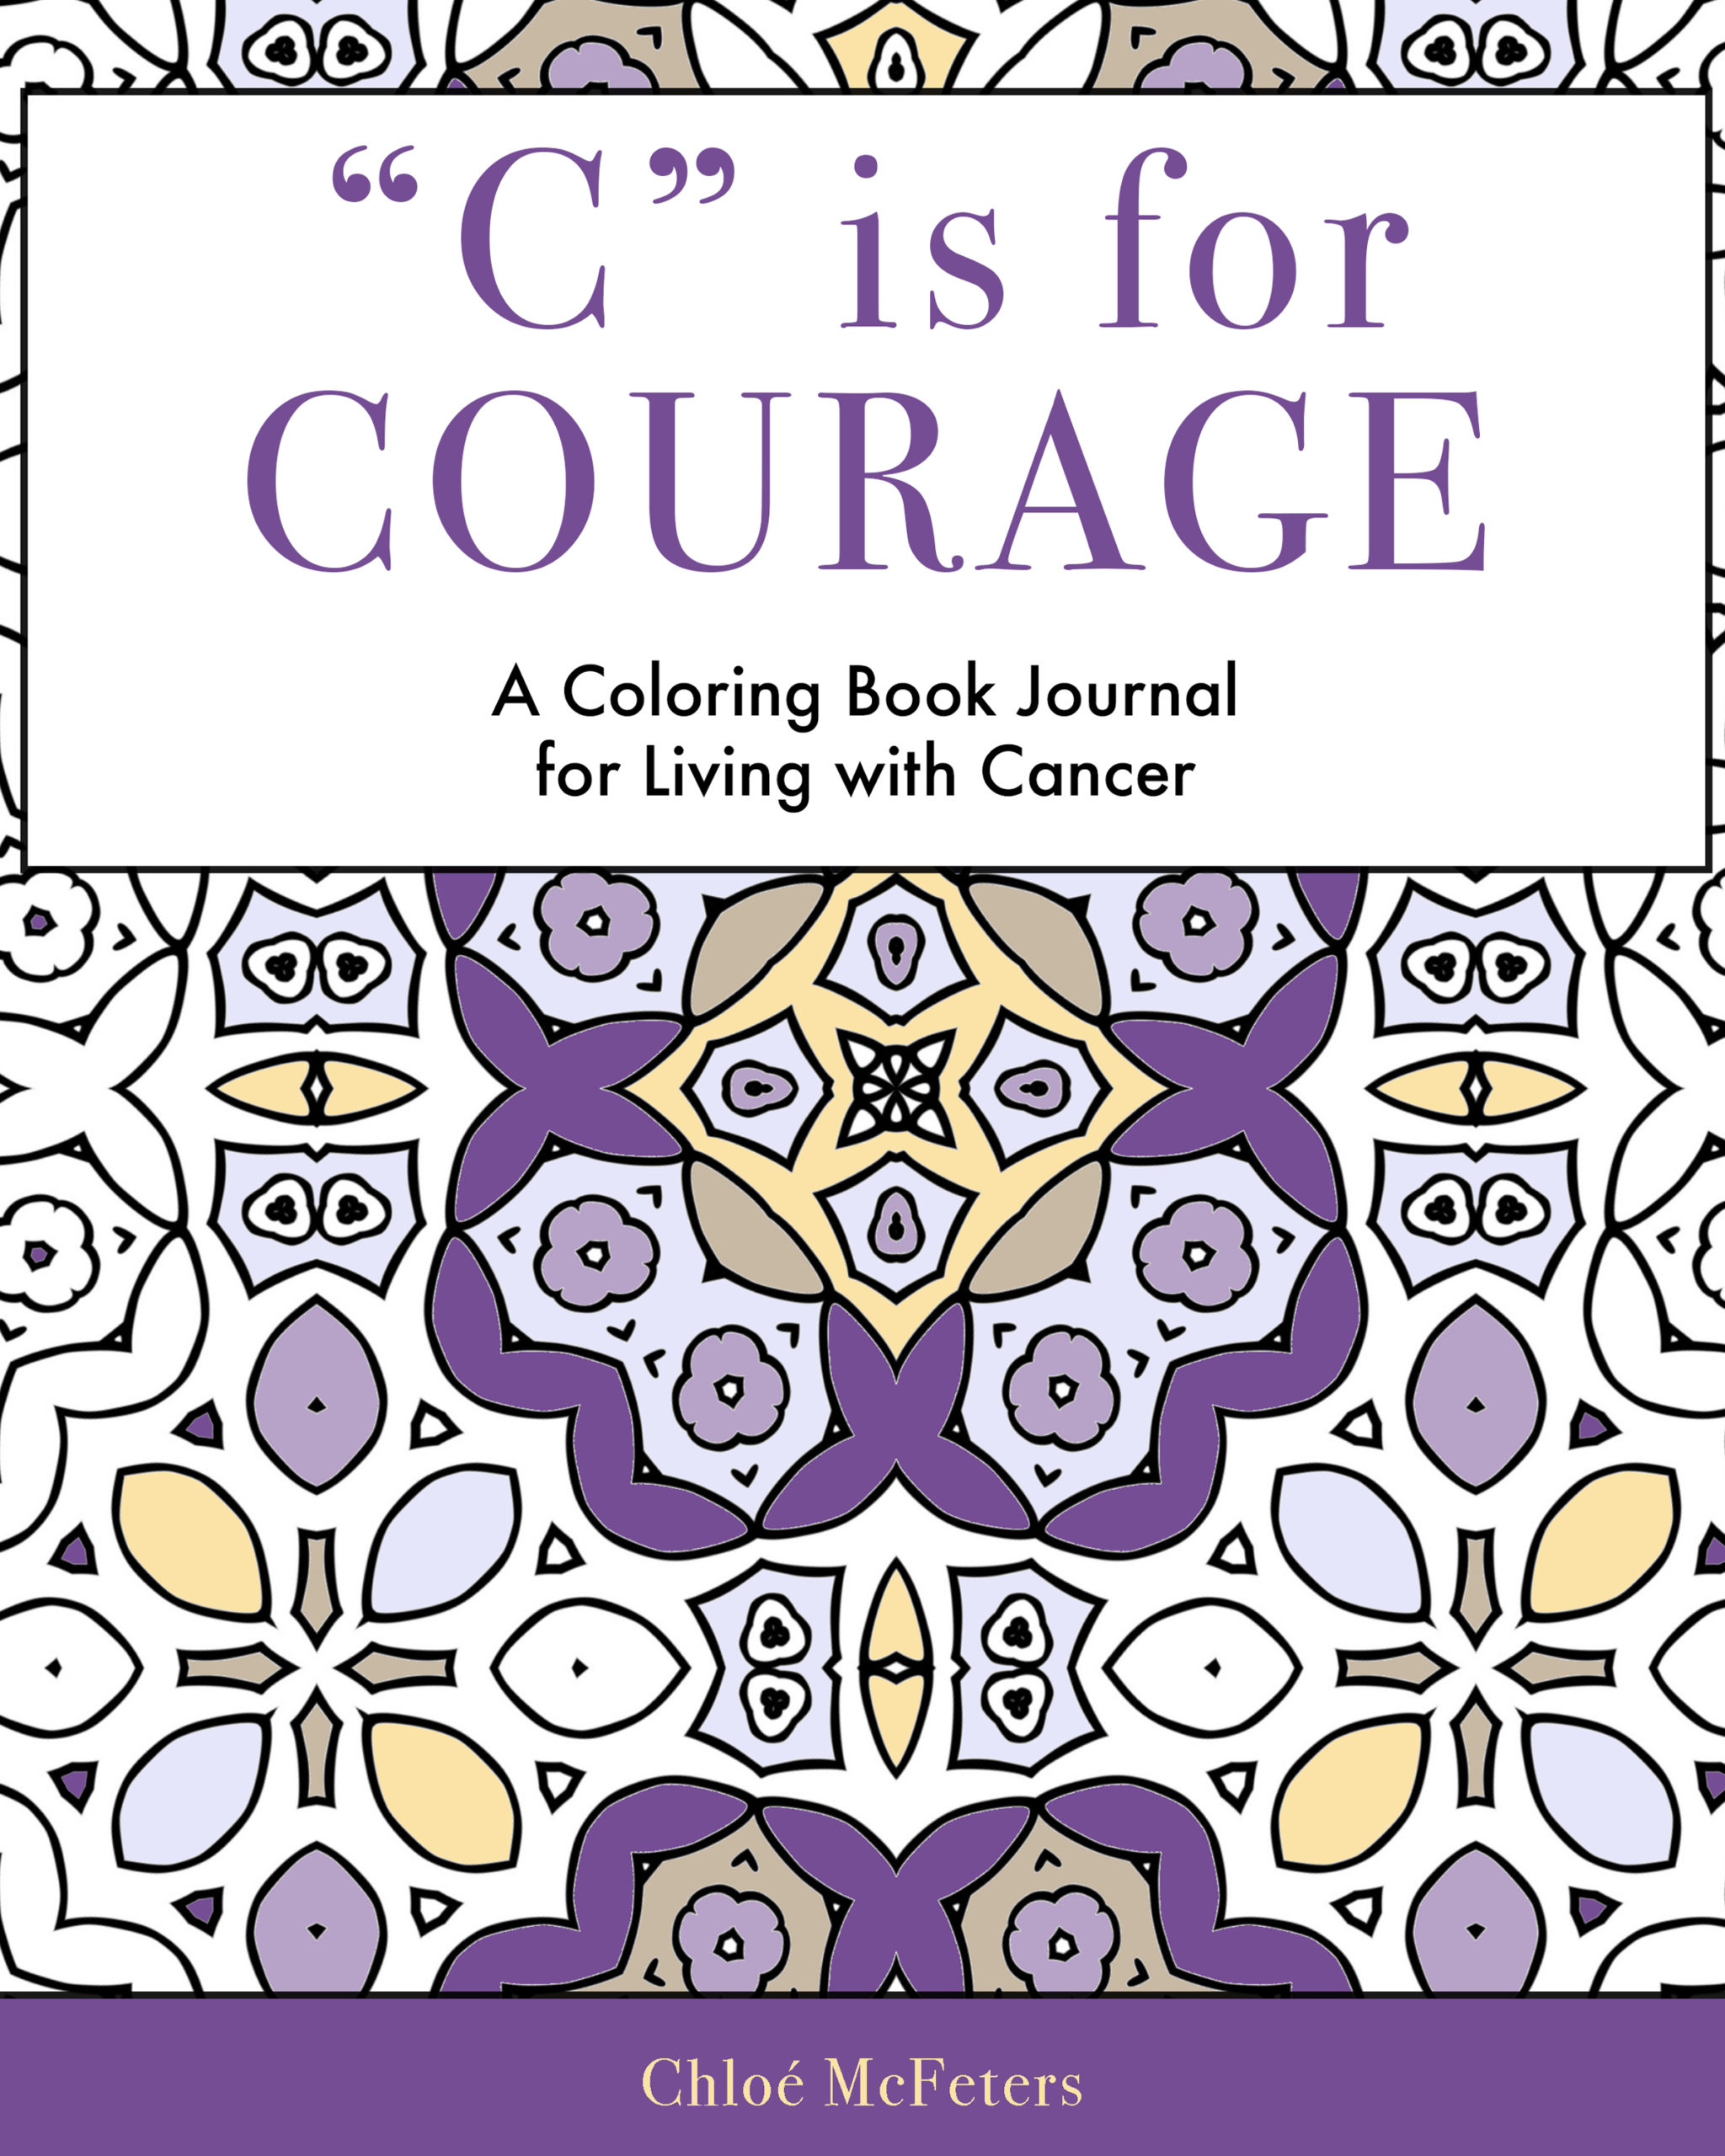 C is for Courage by Chloé McFeters